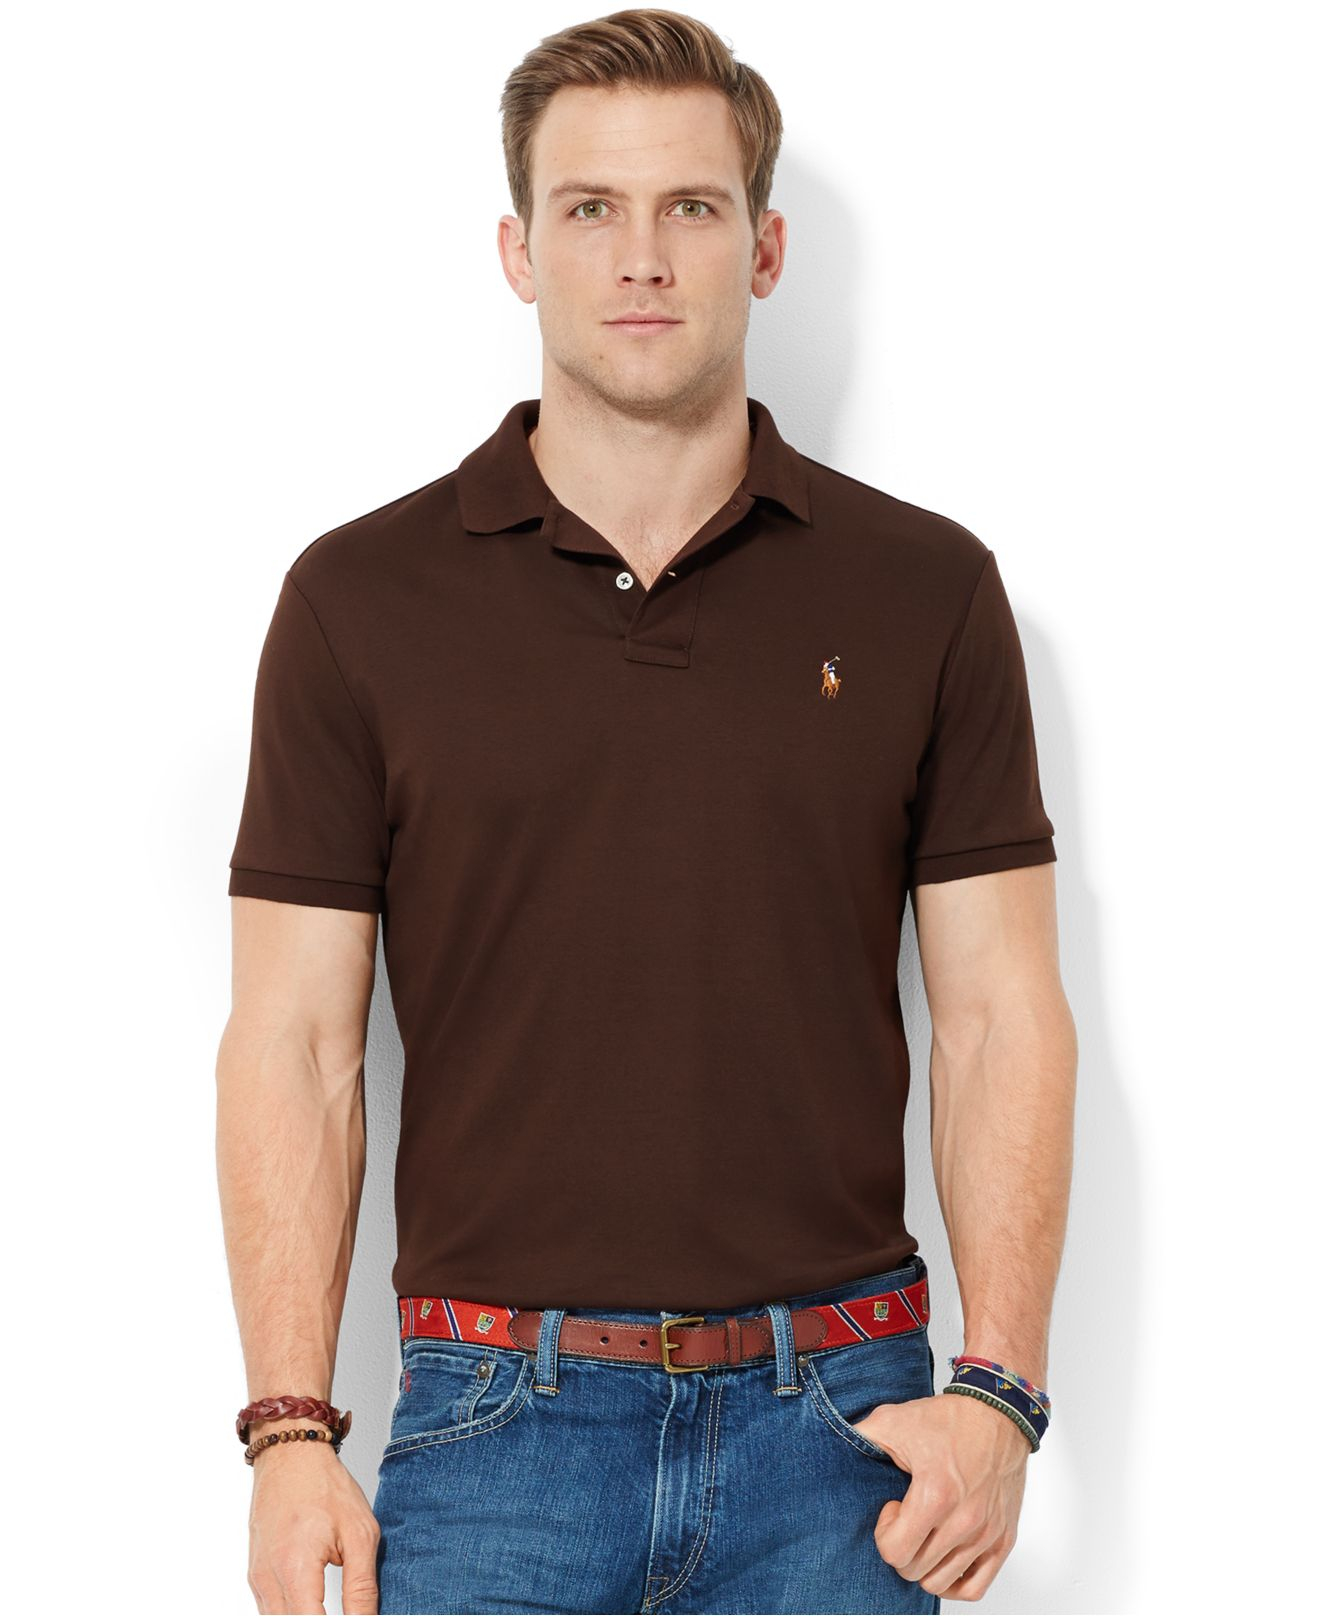 Polo Ralph Lauren Pima Soft-Touch Polo in Brown for Men - Lyst